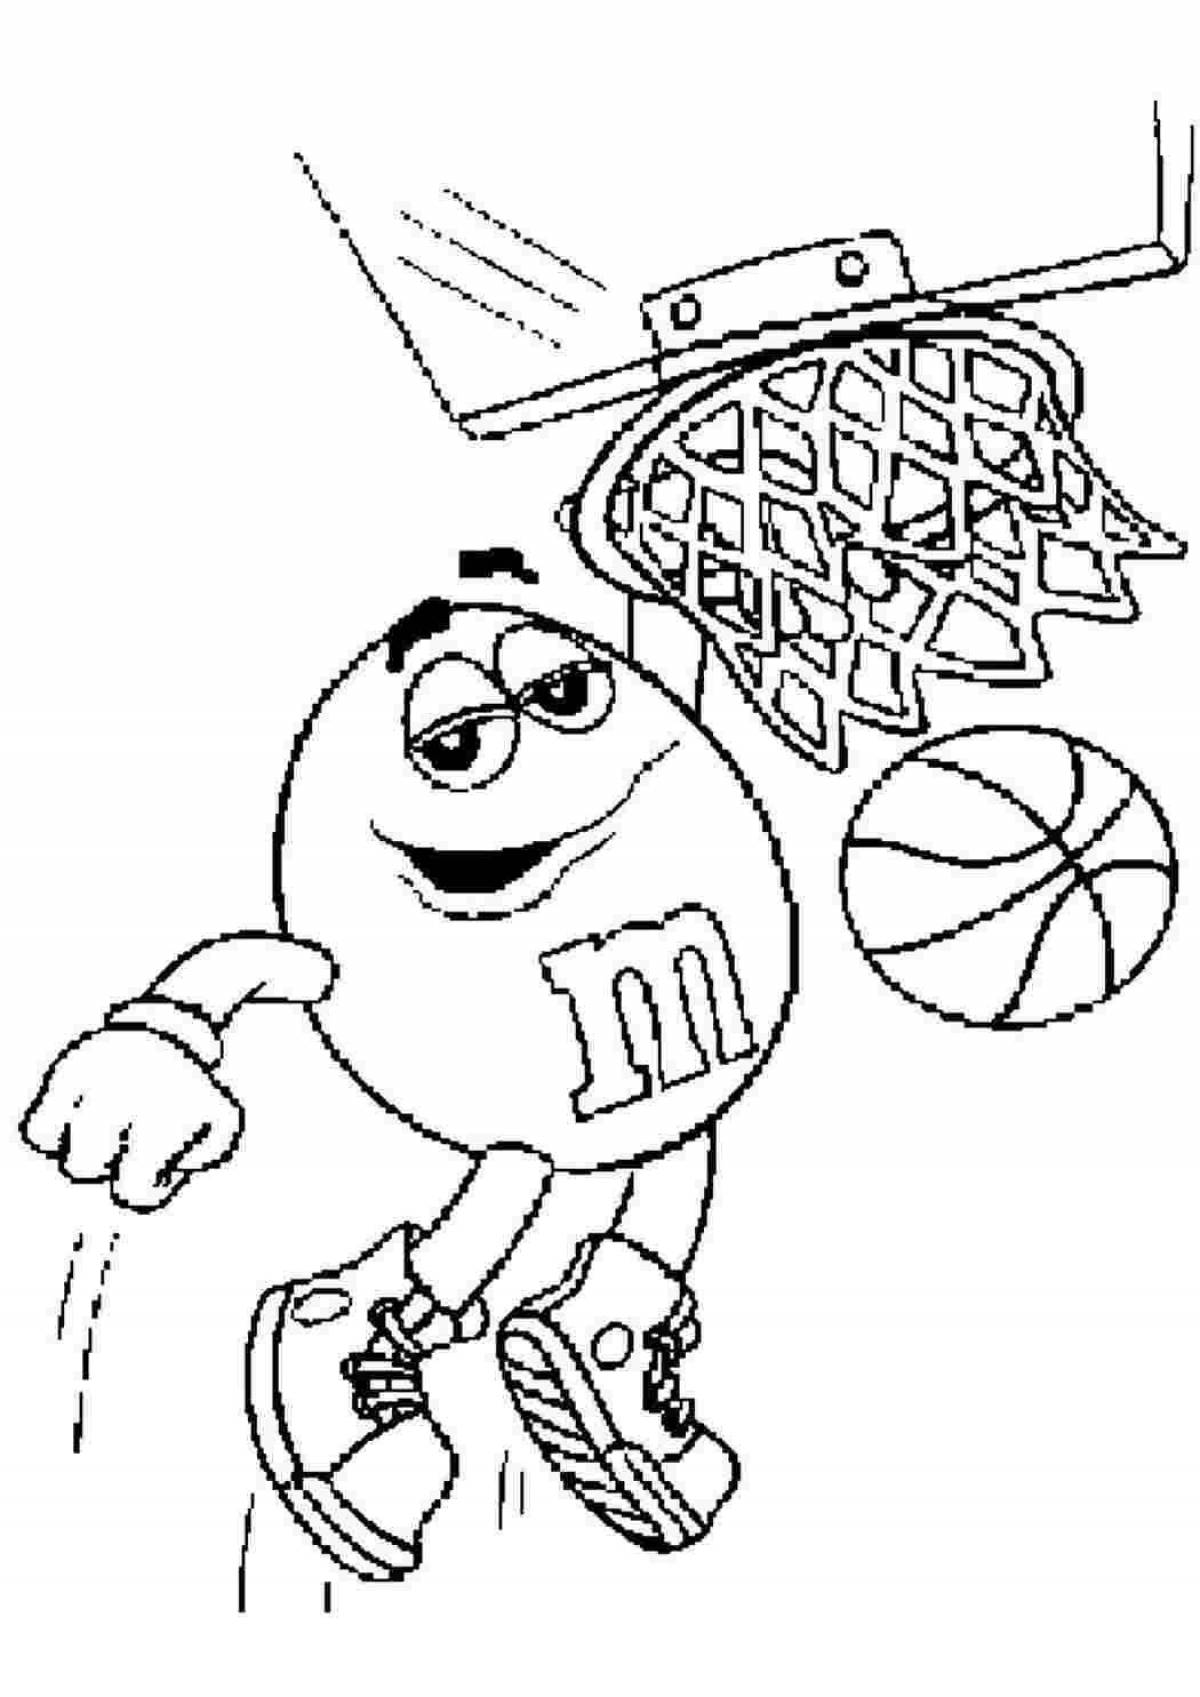 Glowing m&ms coloring page